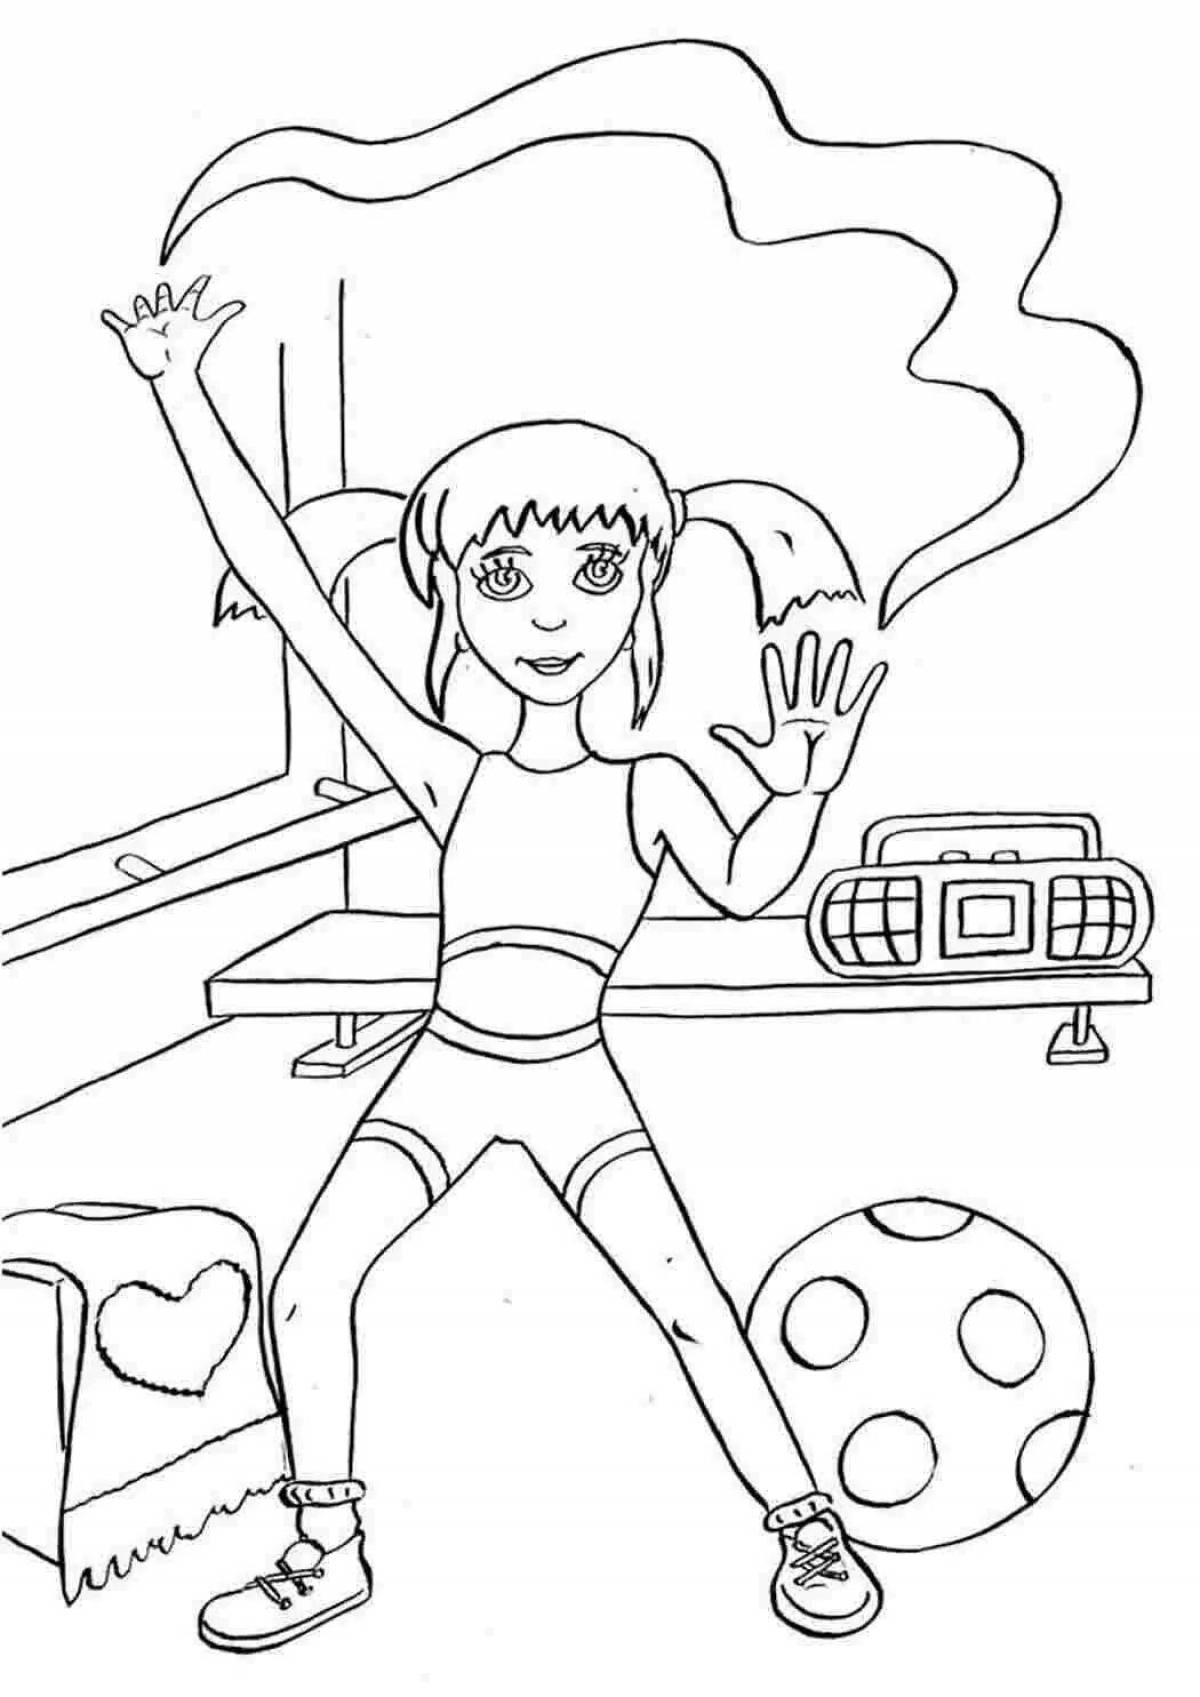 Peaceful Health Coloring Page